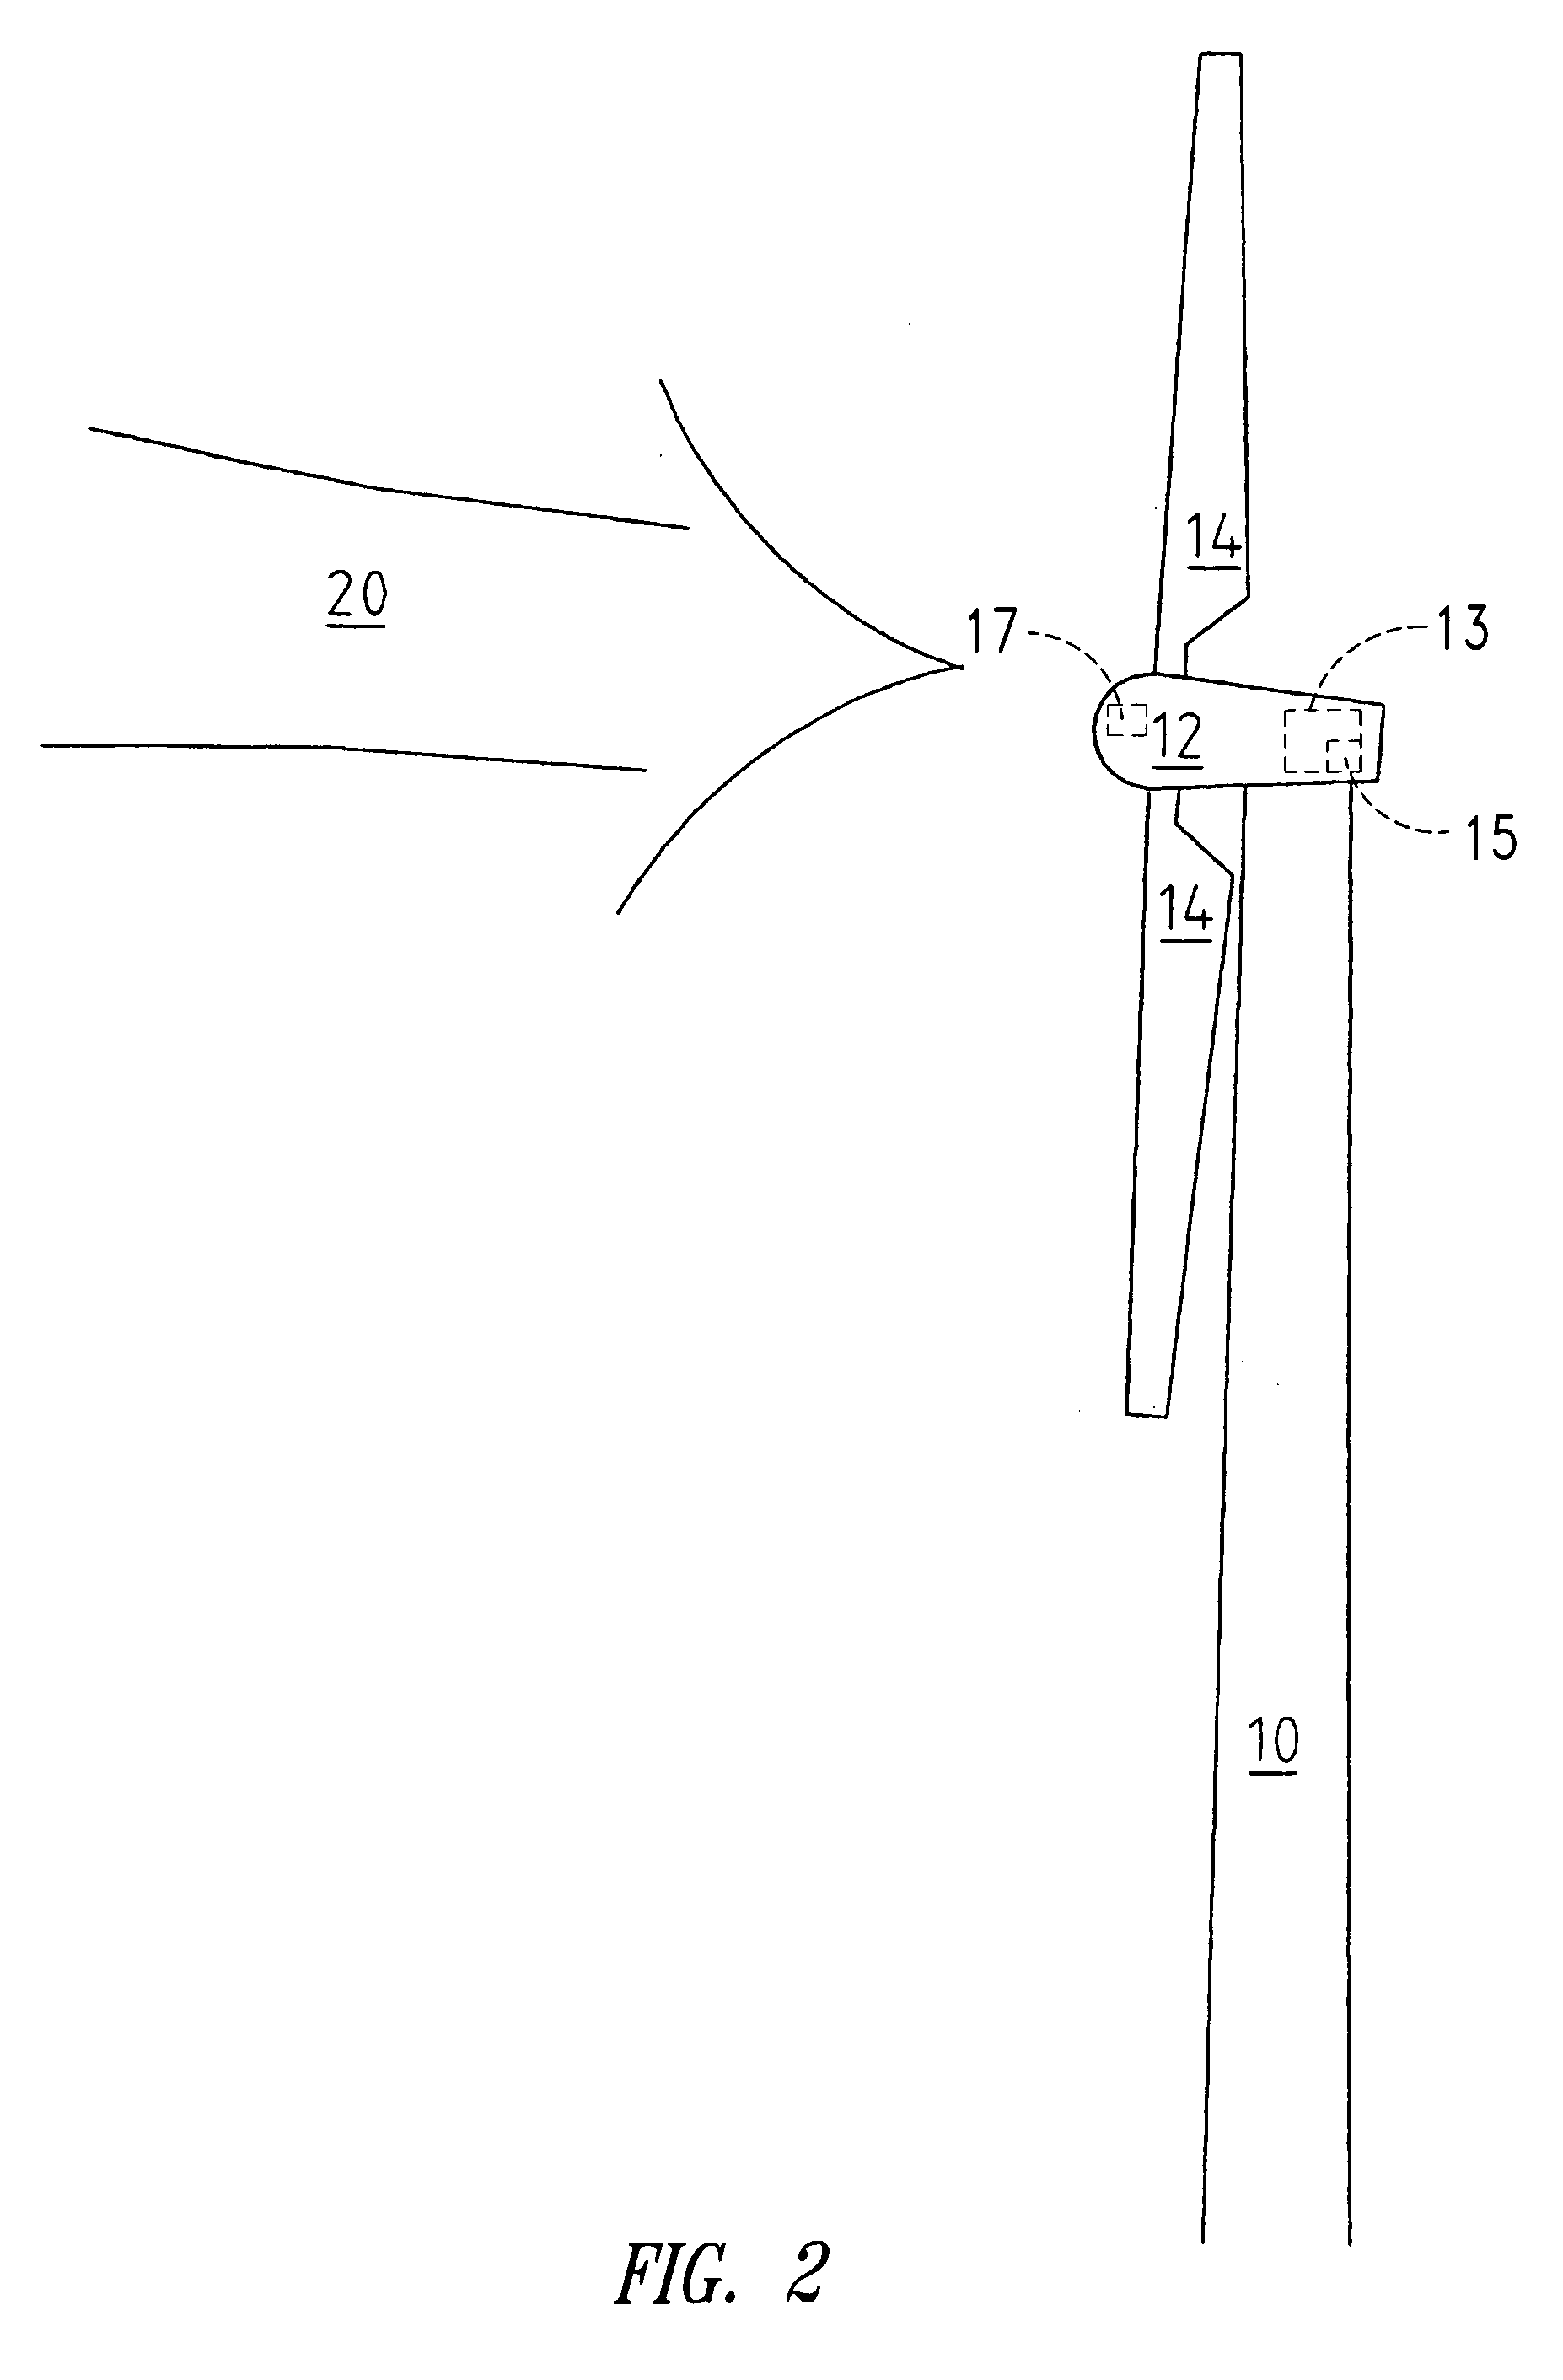 Method of controlling a wind power installation